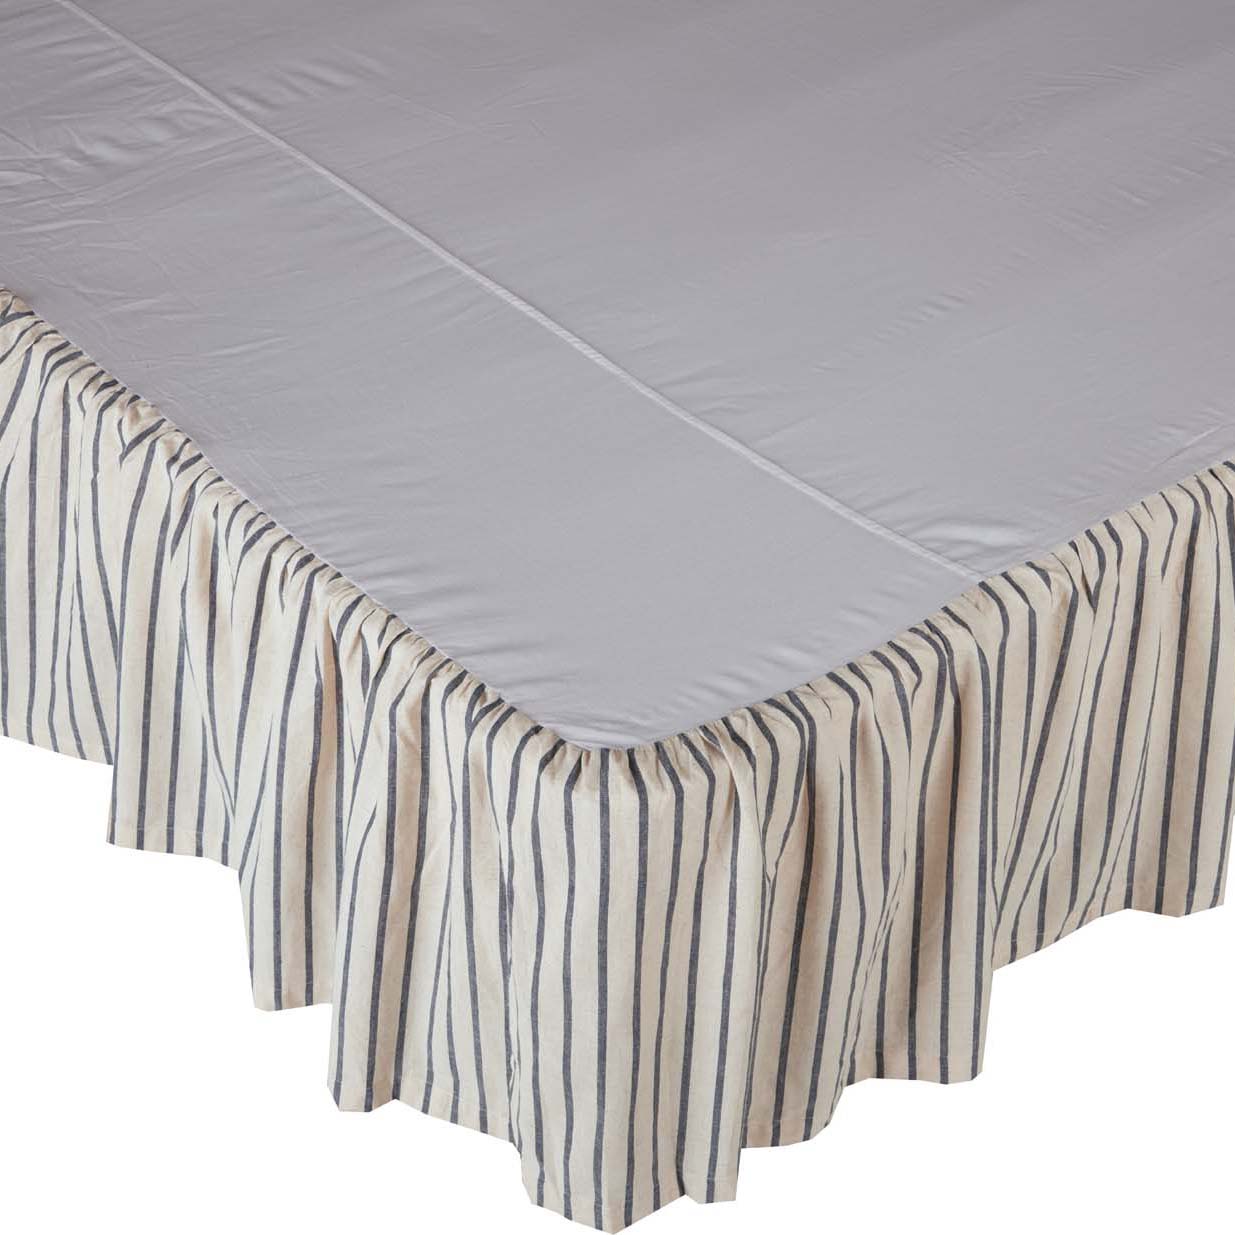 Kaila King Bed Skirt 78x80x16 VHC Brands